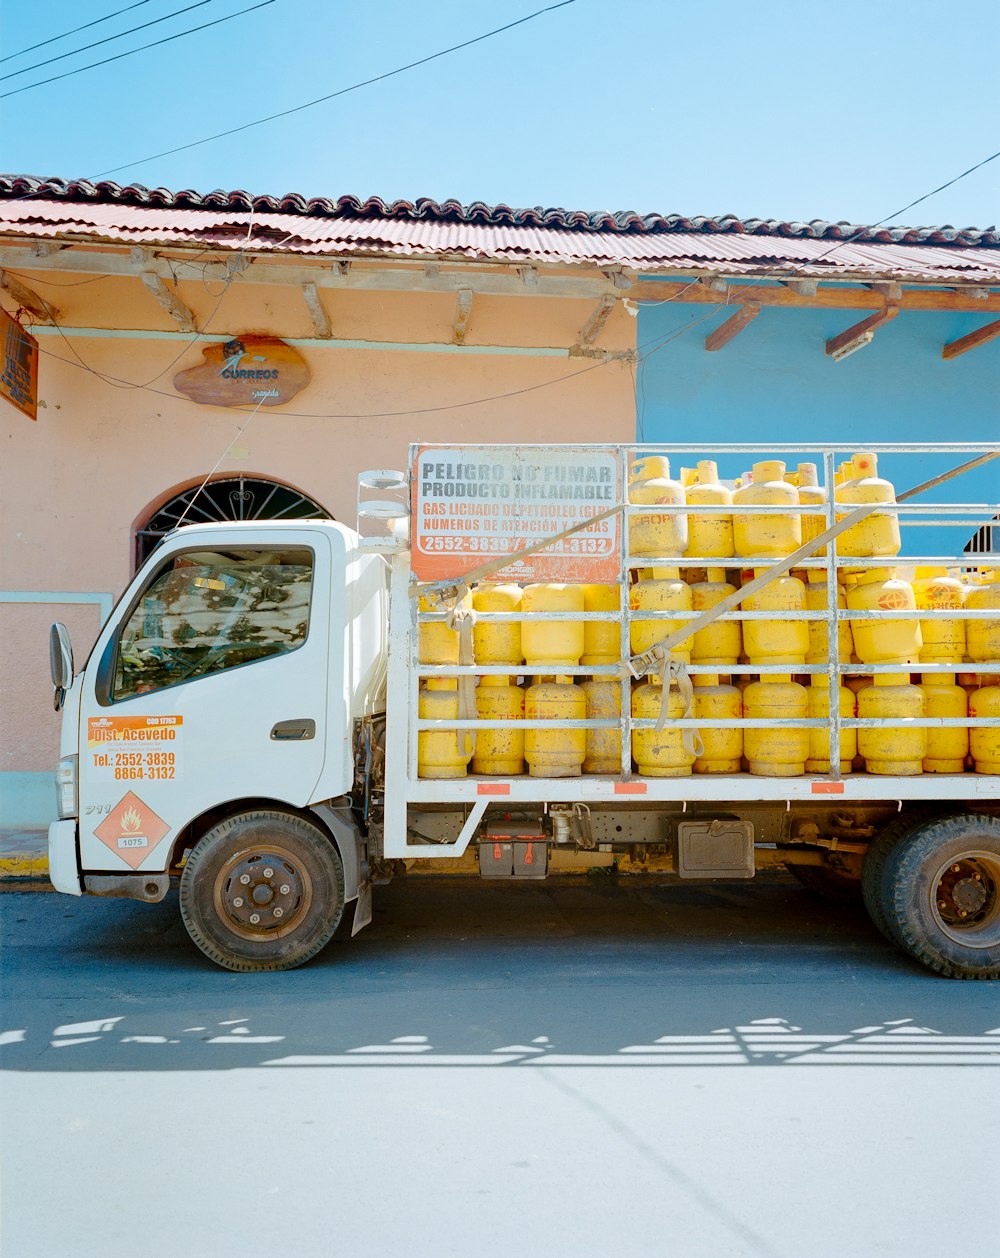 a truck with a lot of yellow containers on the back